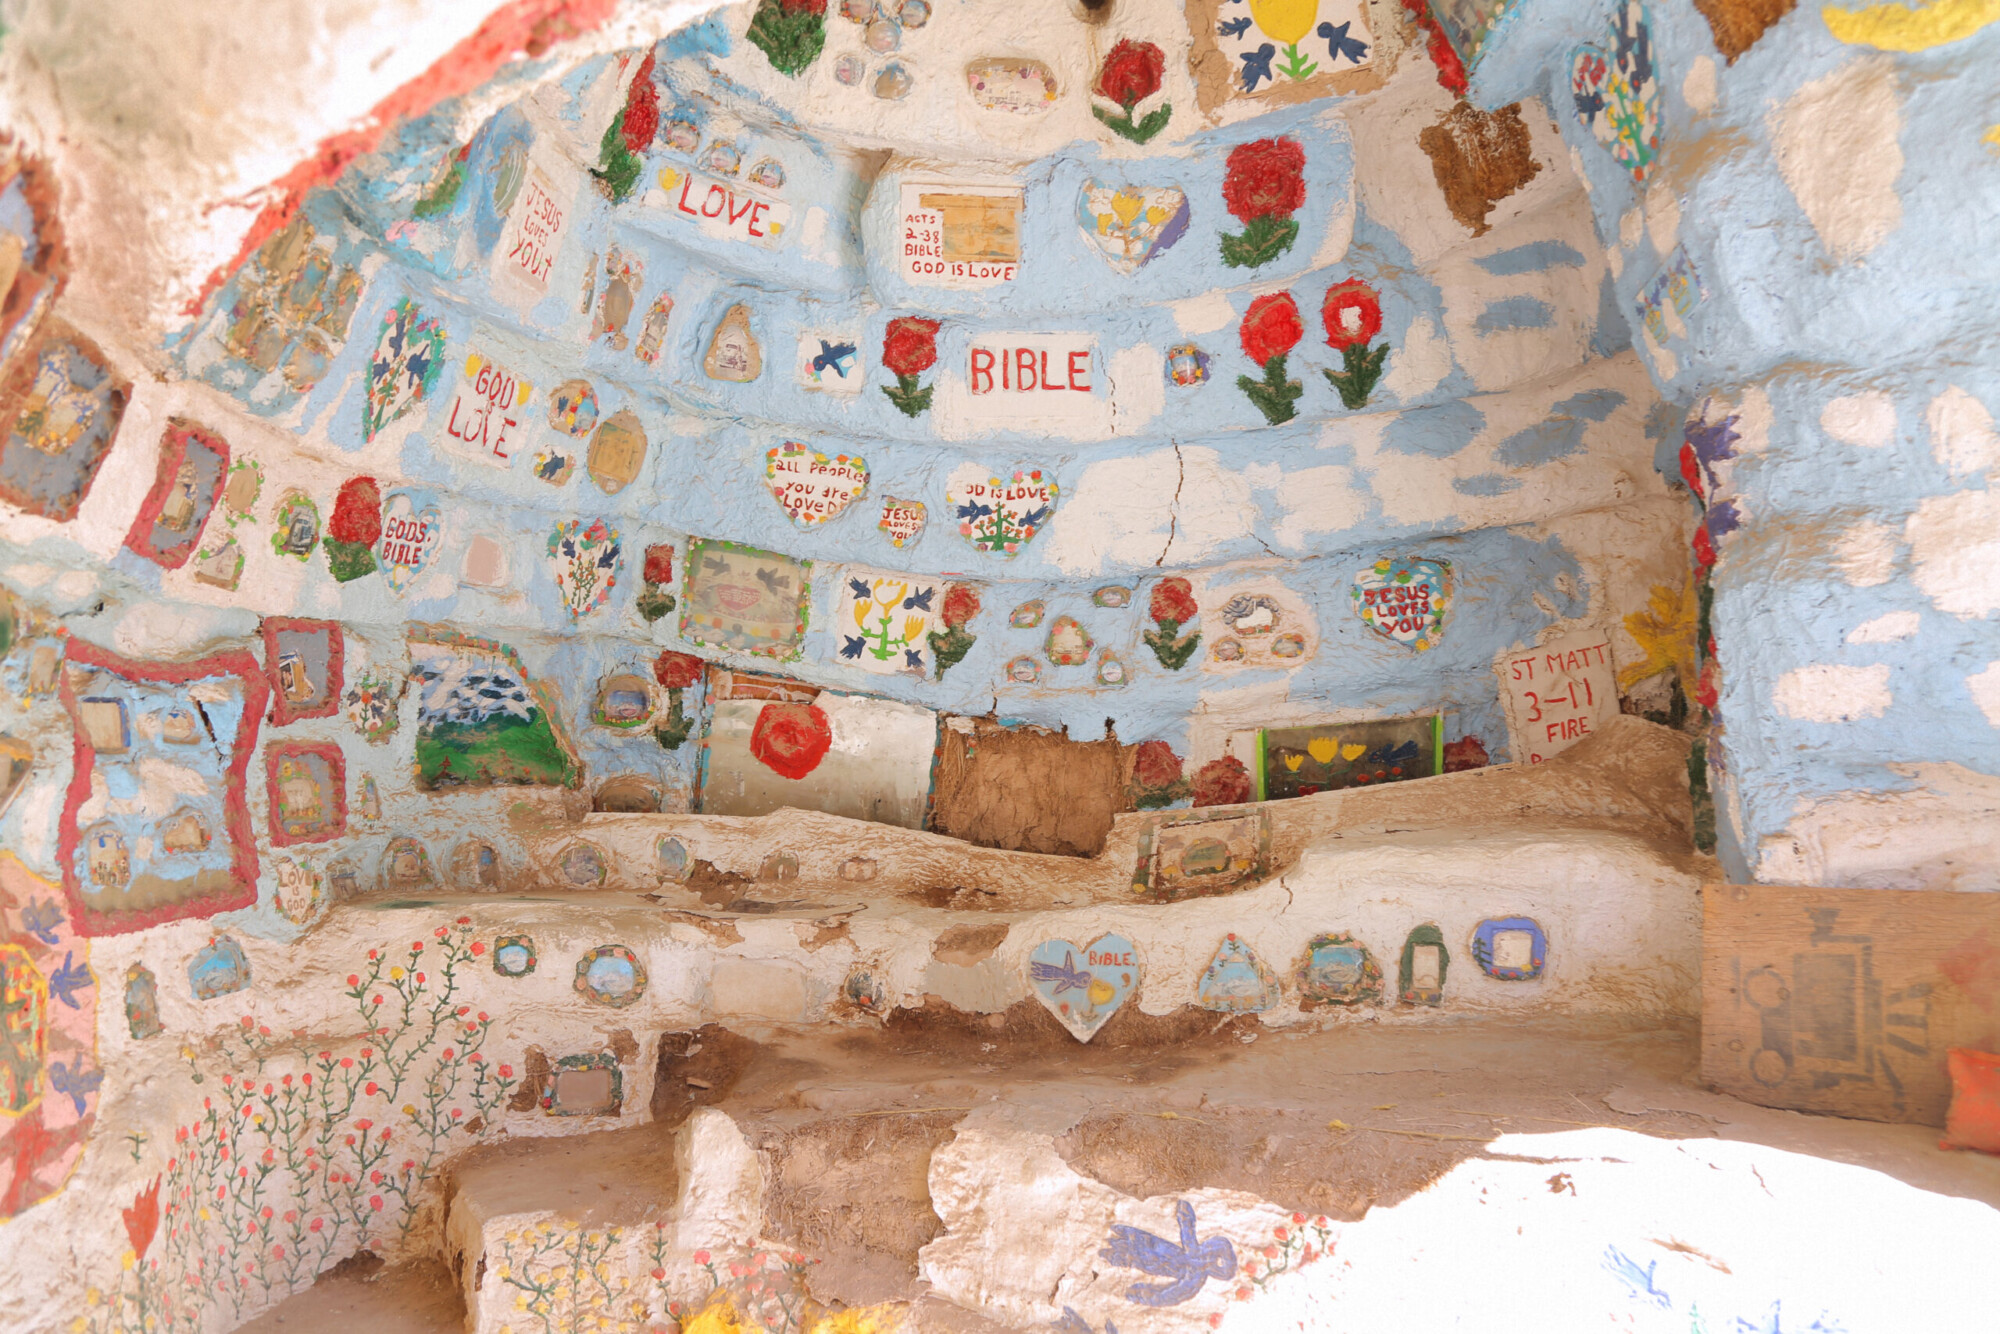 Interior of a hand painted and constructed cave at Salvation Mountain, California.